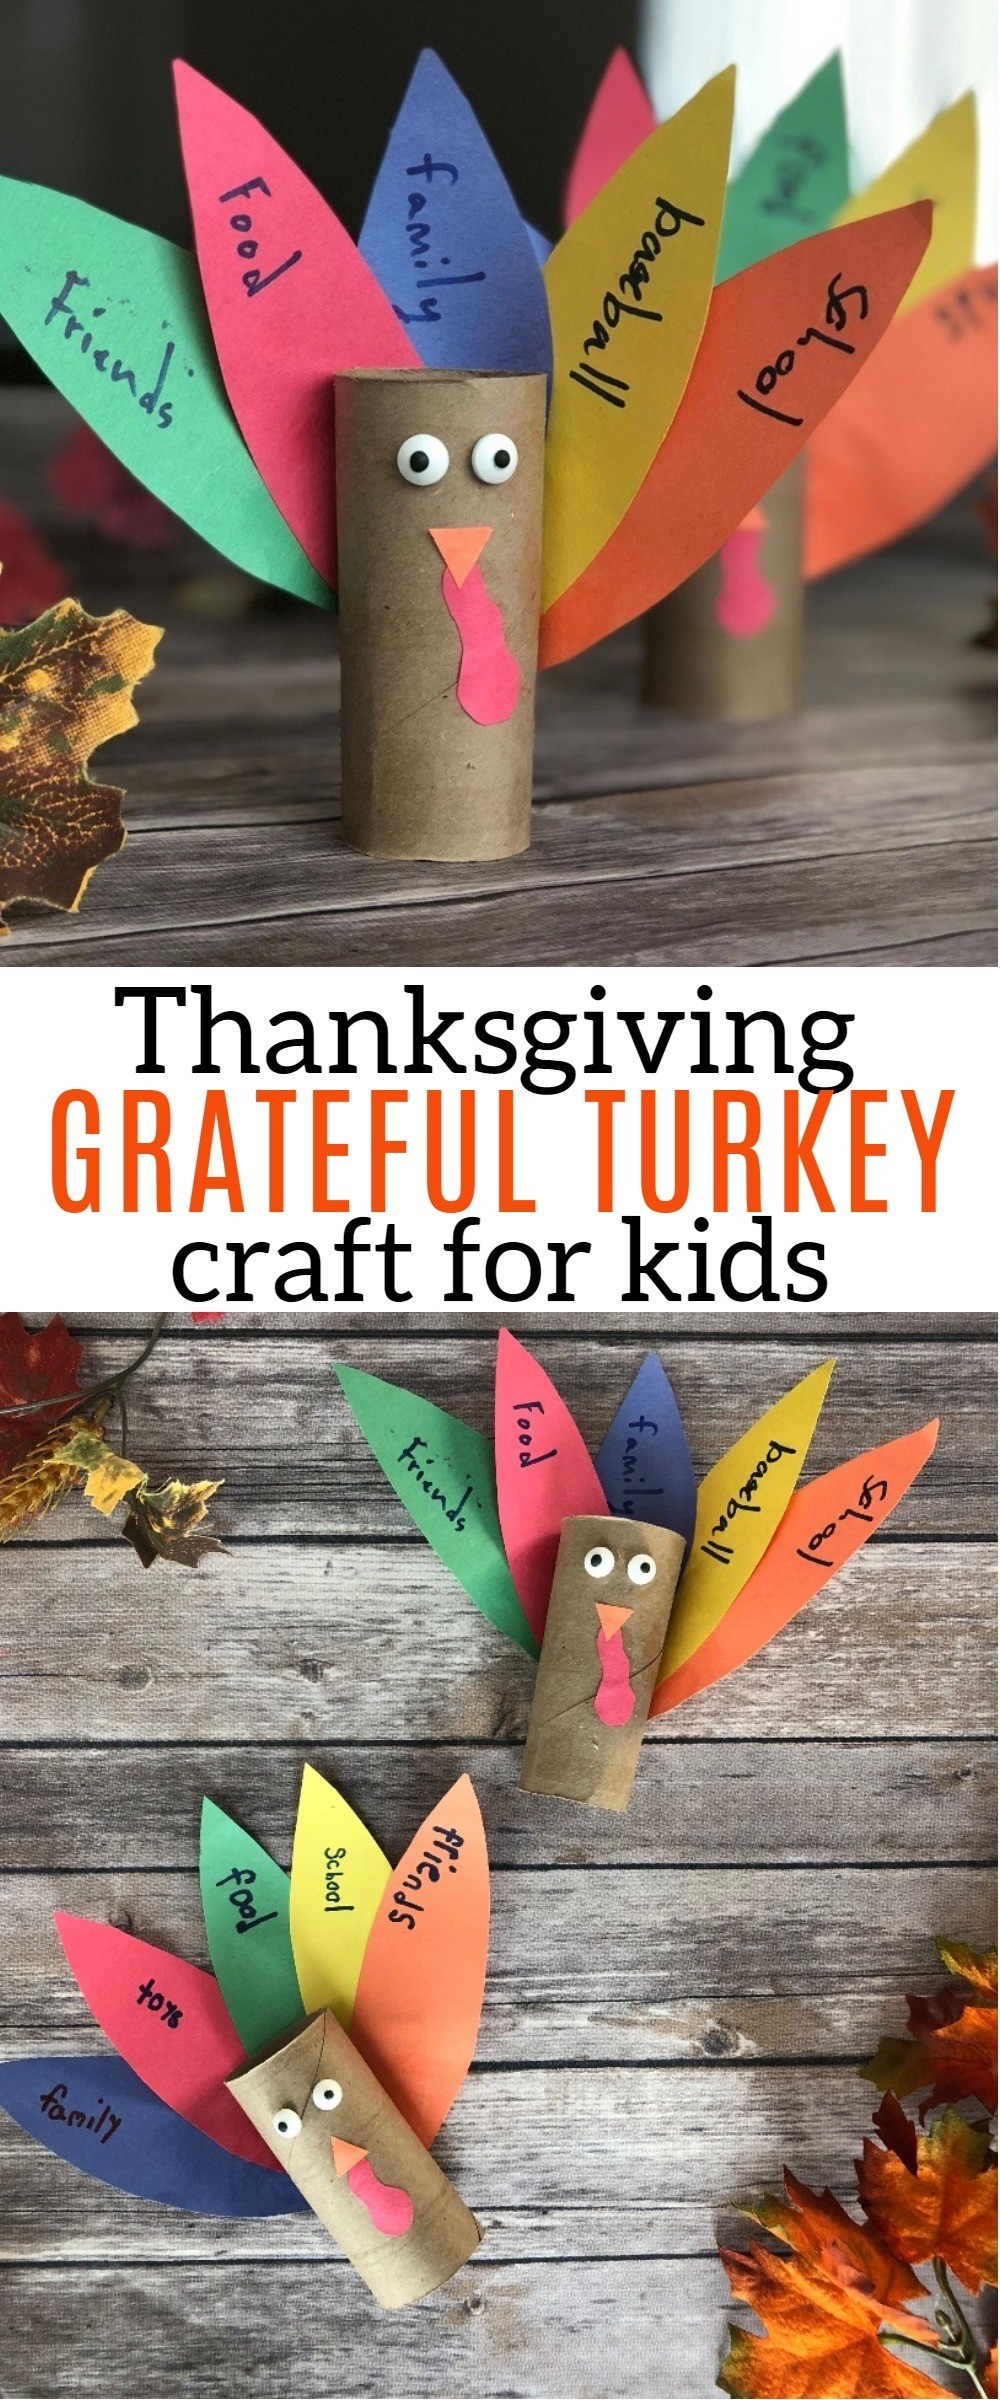 Share Your Gratitude With This Thanksgiving Turkey Toilet Paper Roll Craft! Check out this tutorial to help your kids make their own thankful turkey craft